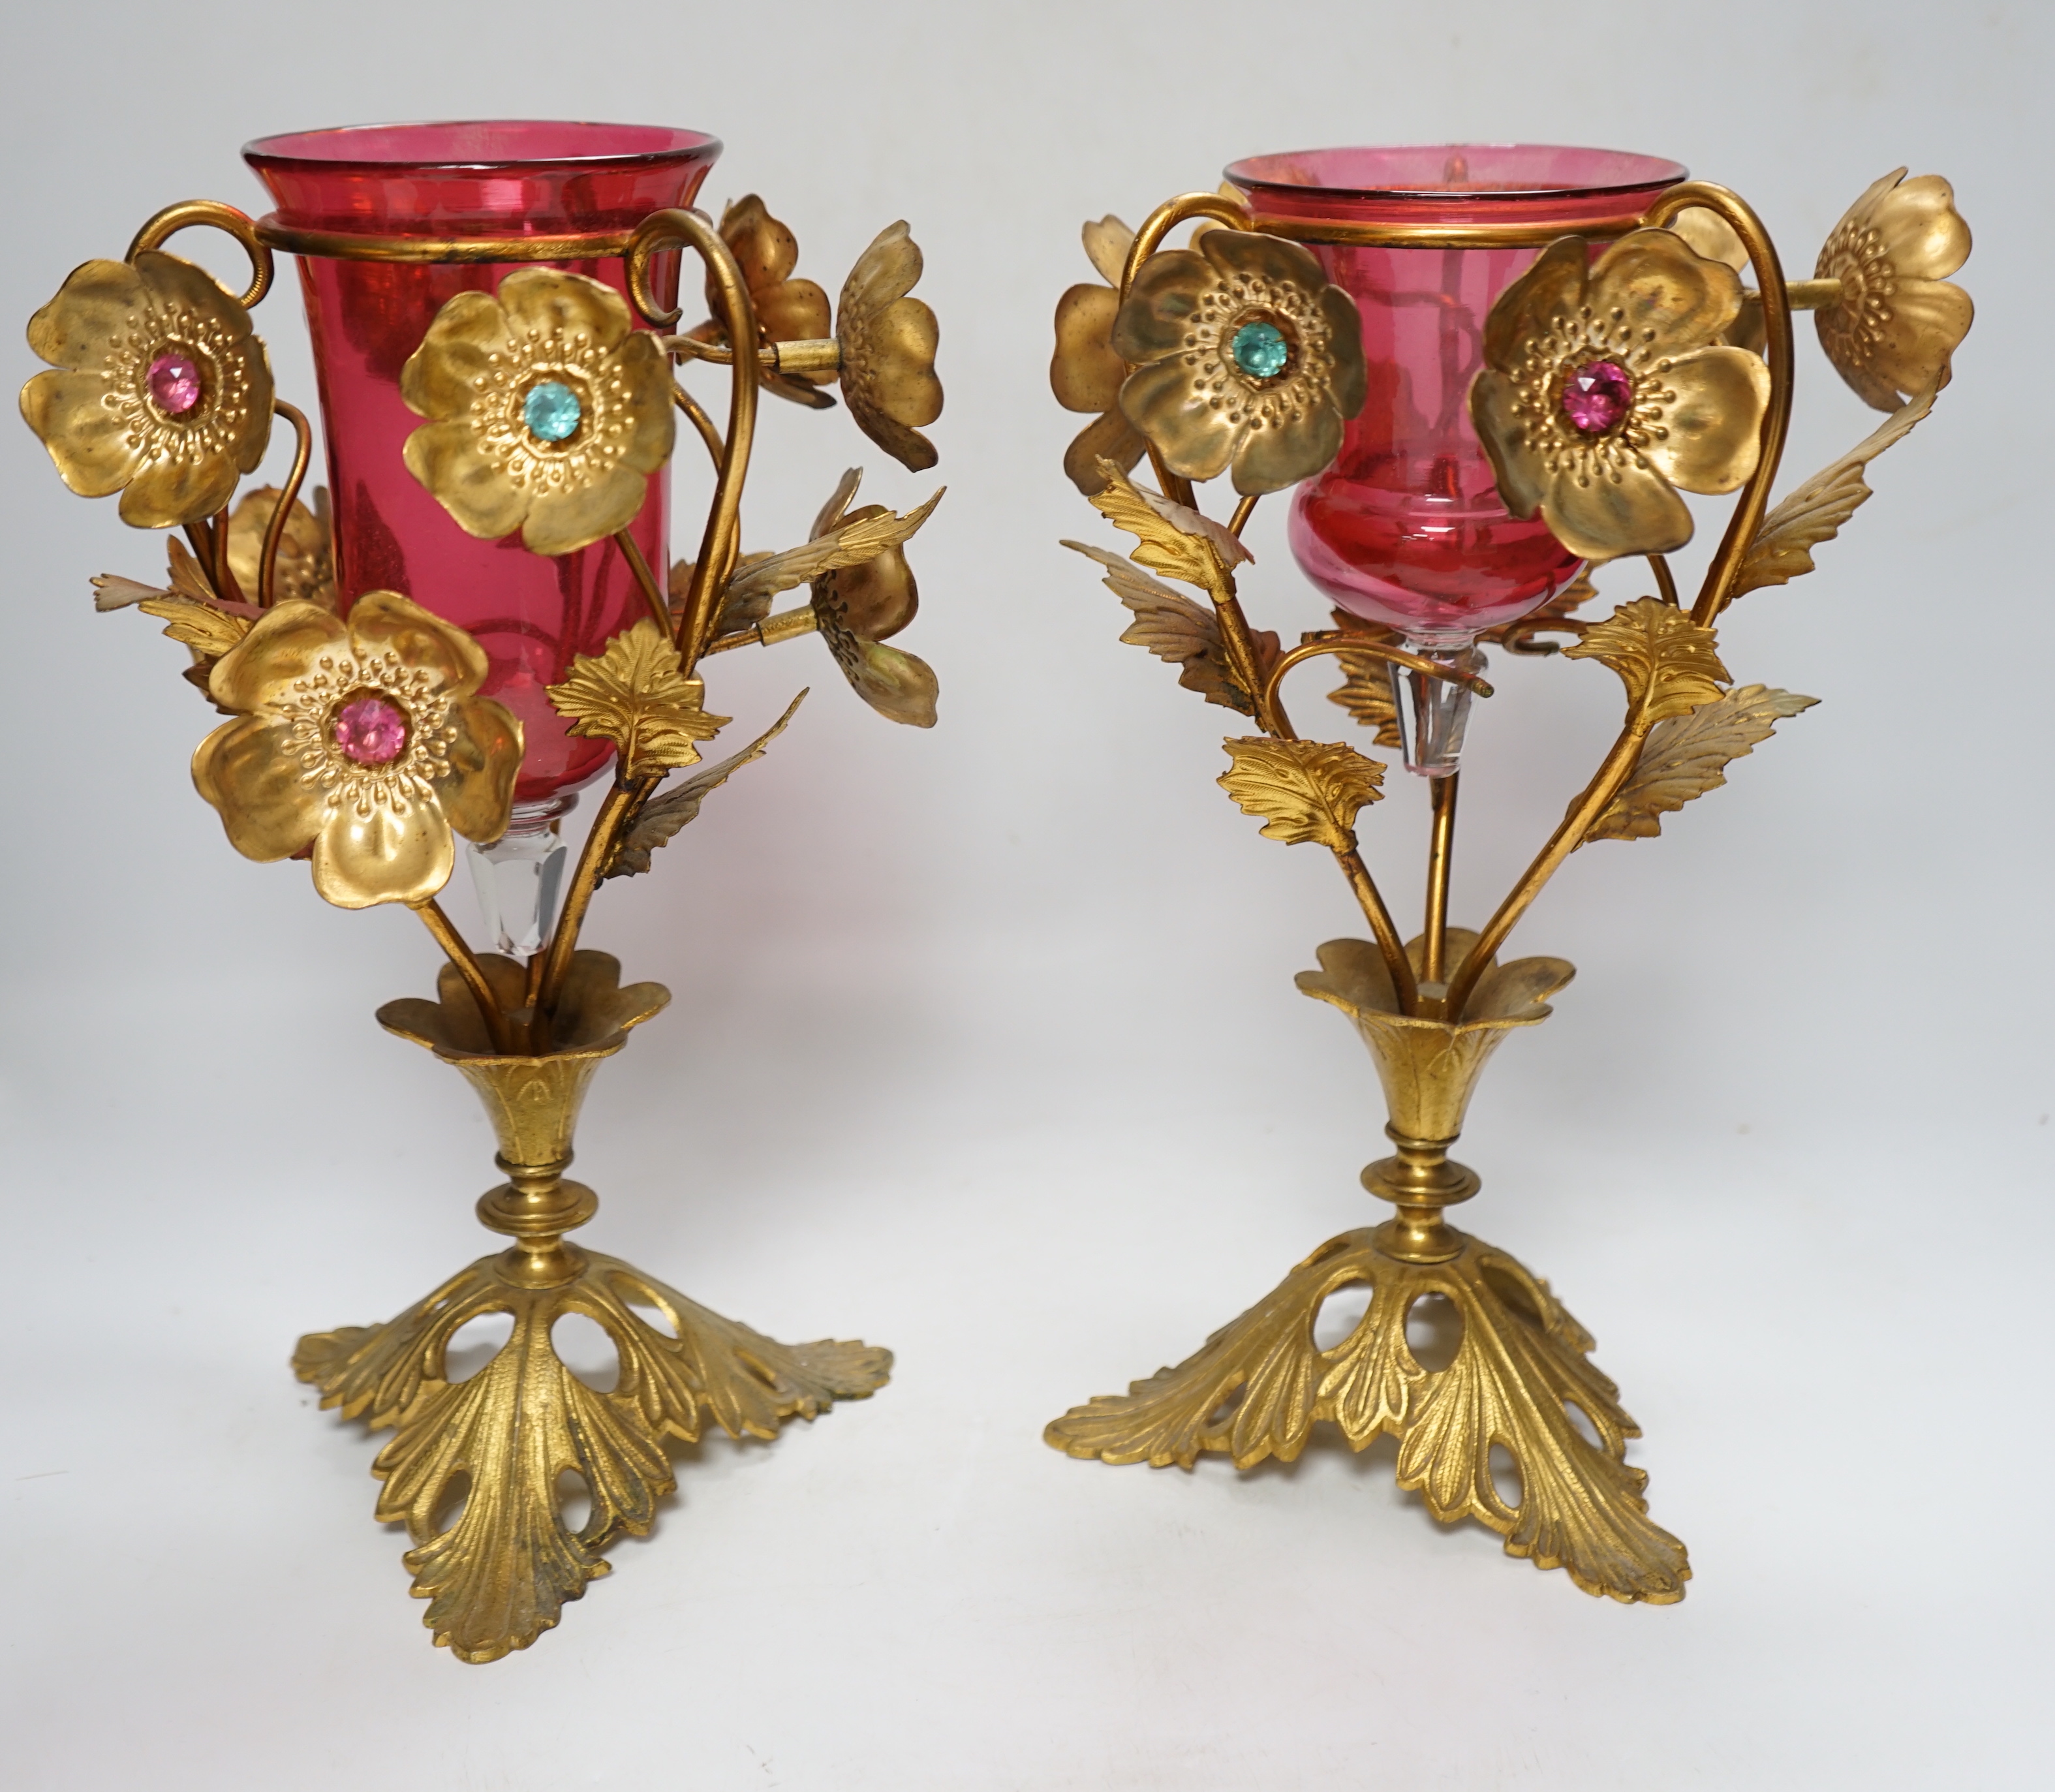 A near pair of early 20th century cranberry glass and gilt metal ornate vases, 31cm